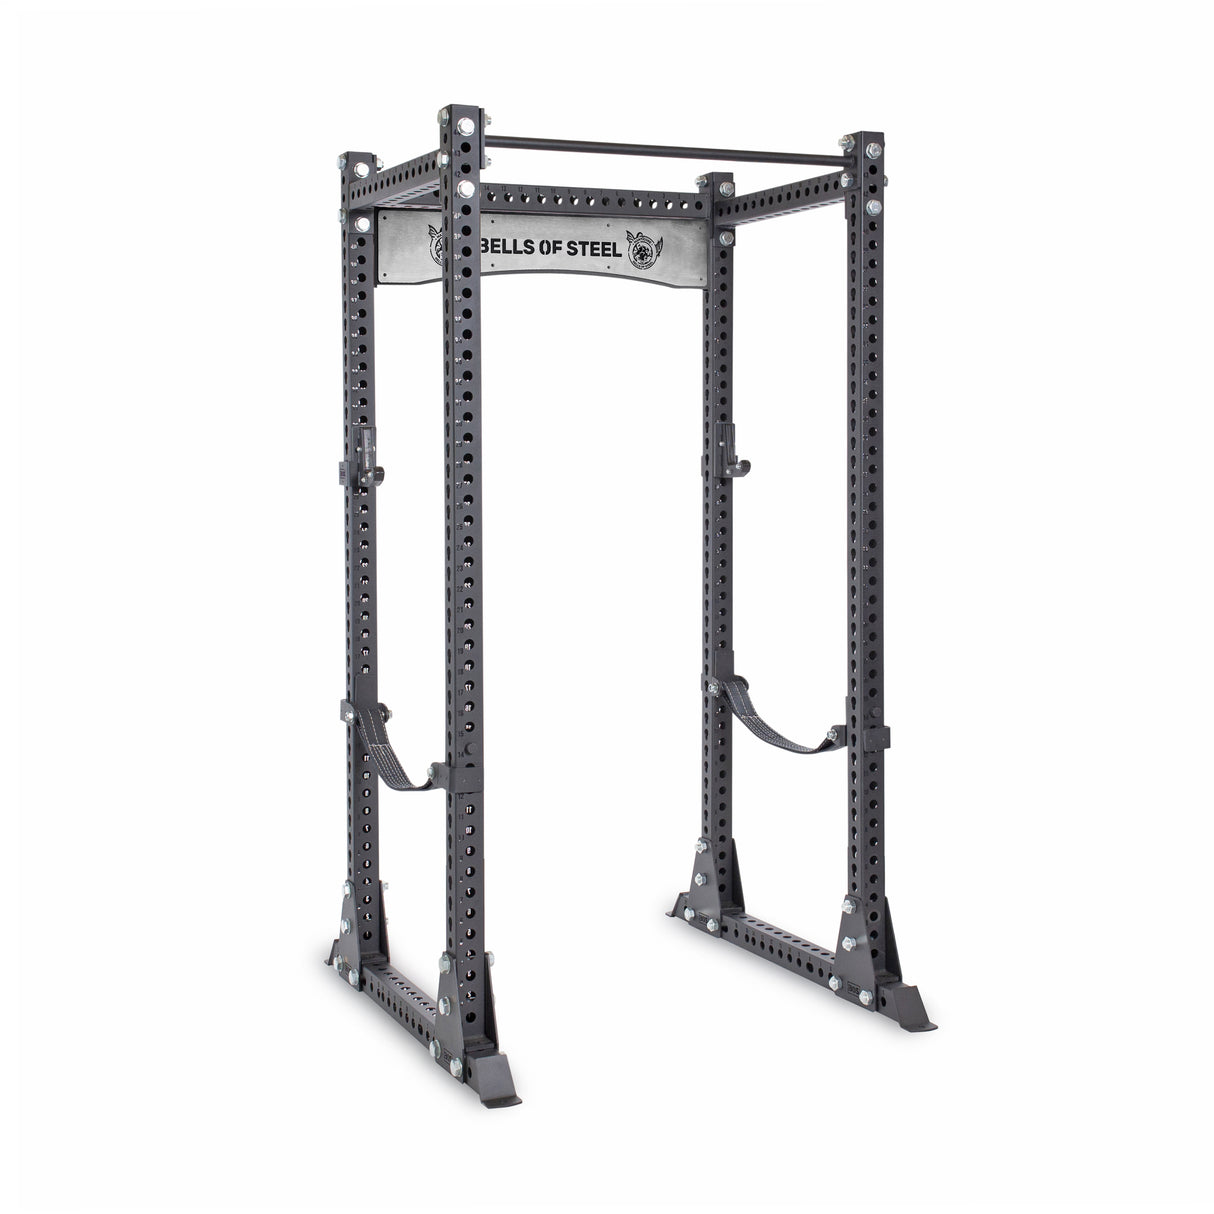 product picture of Manticore Flat Foot Power Rack PREBUILT